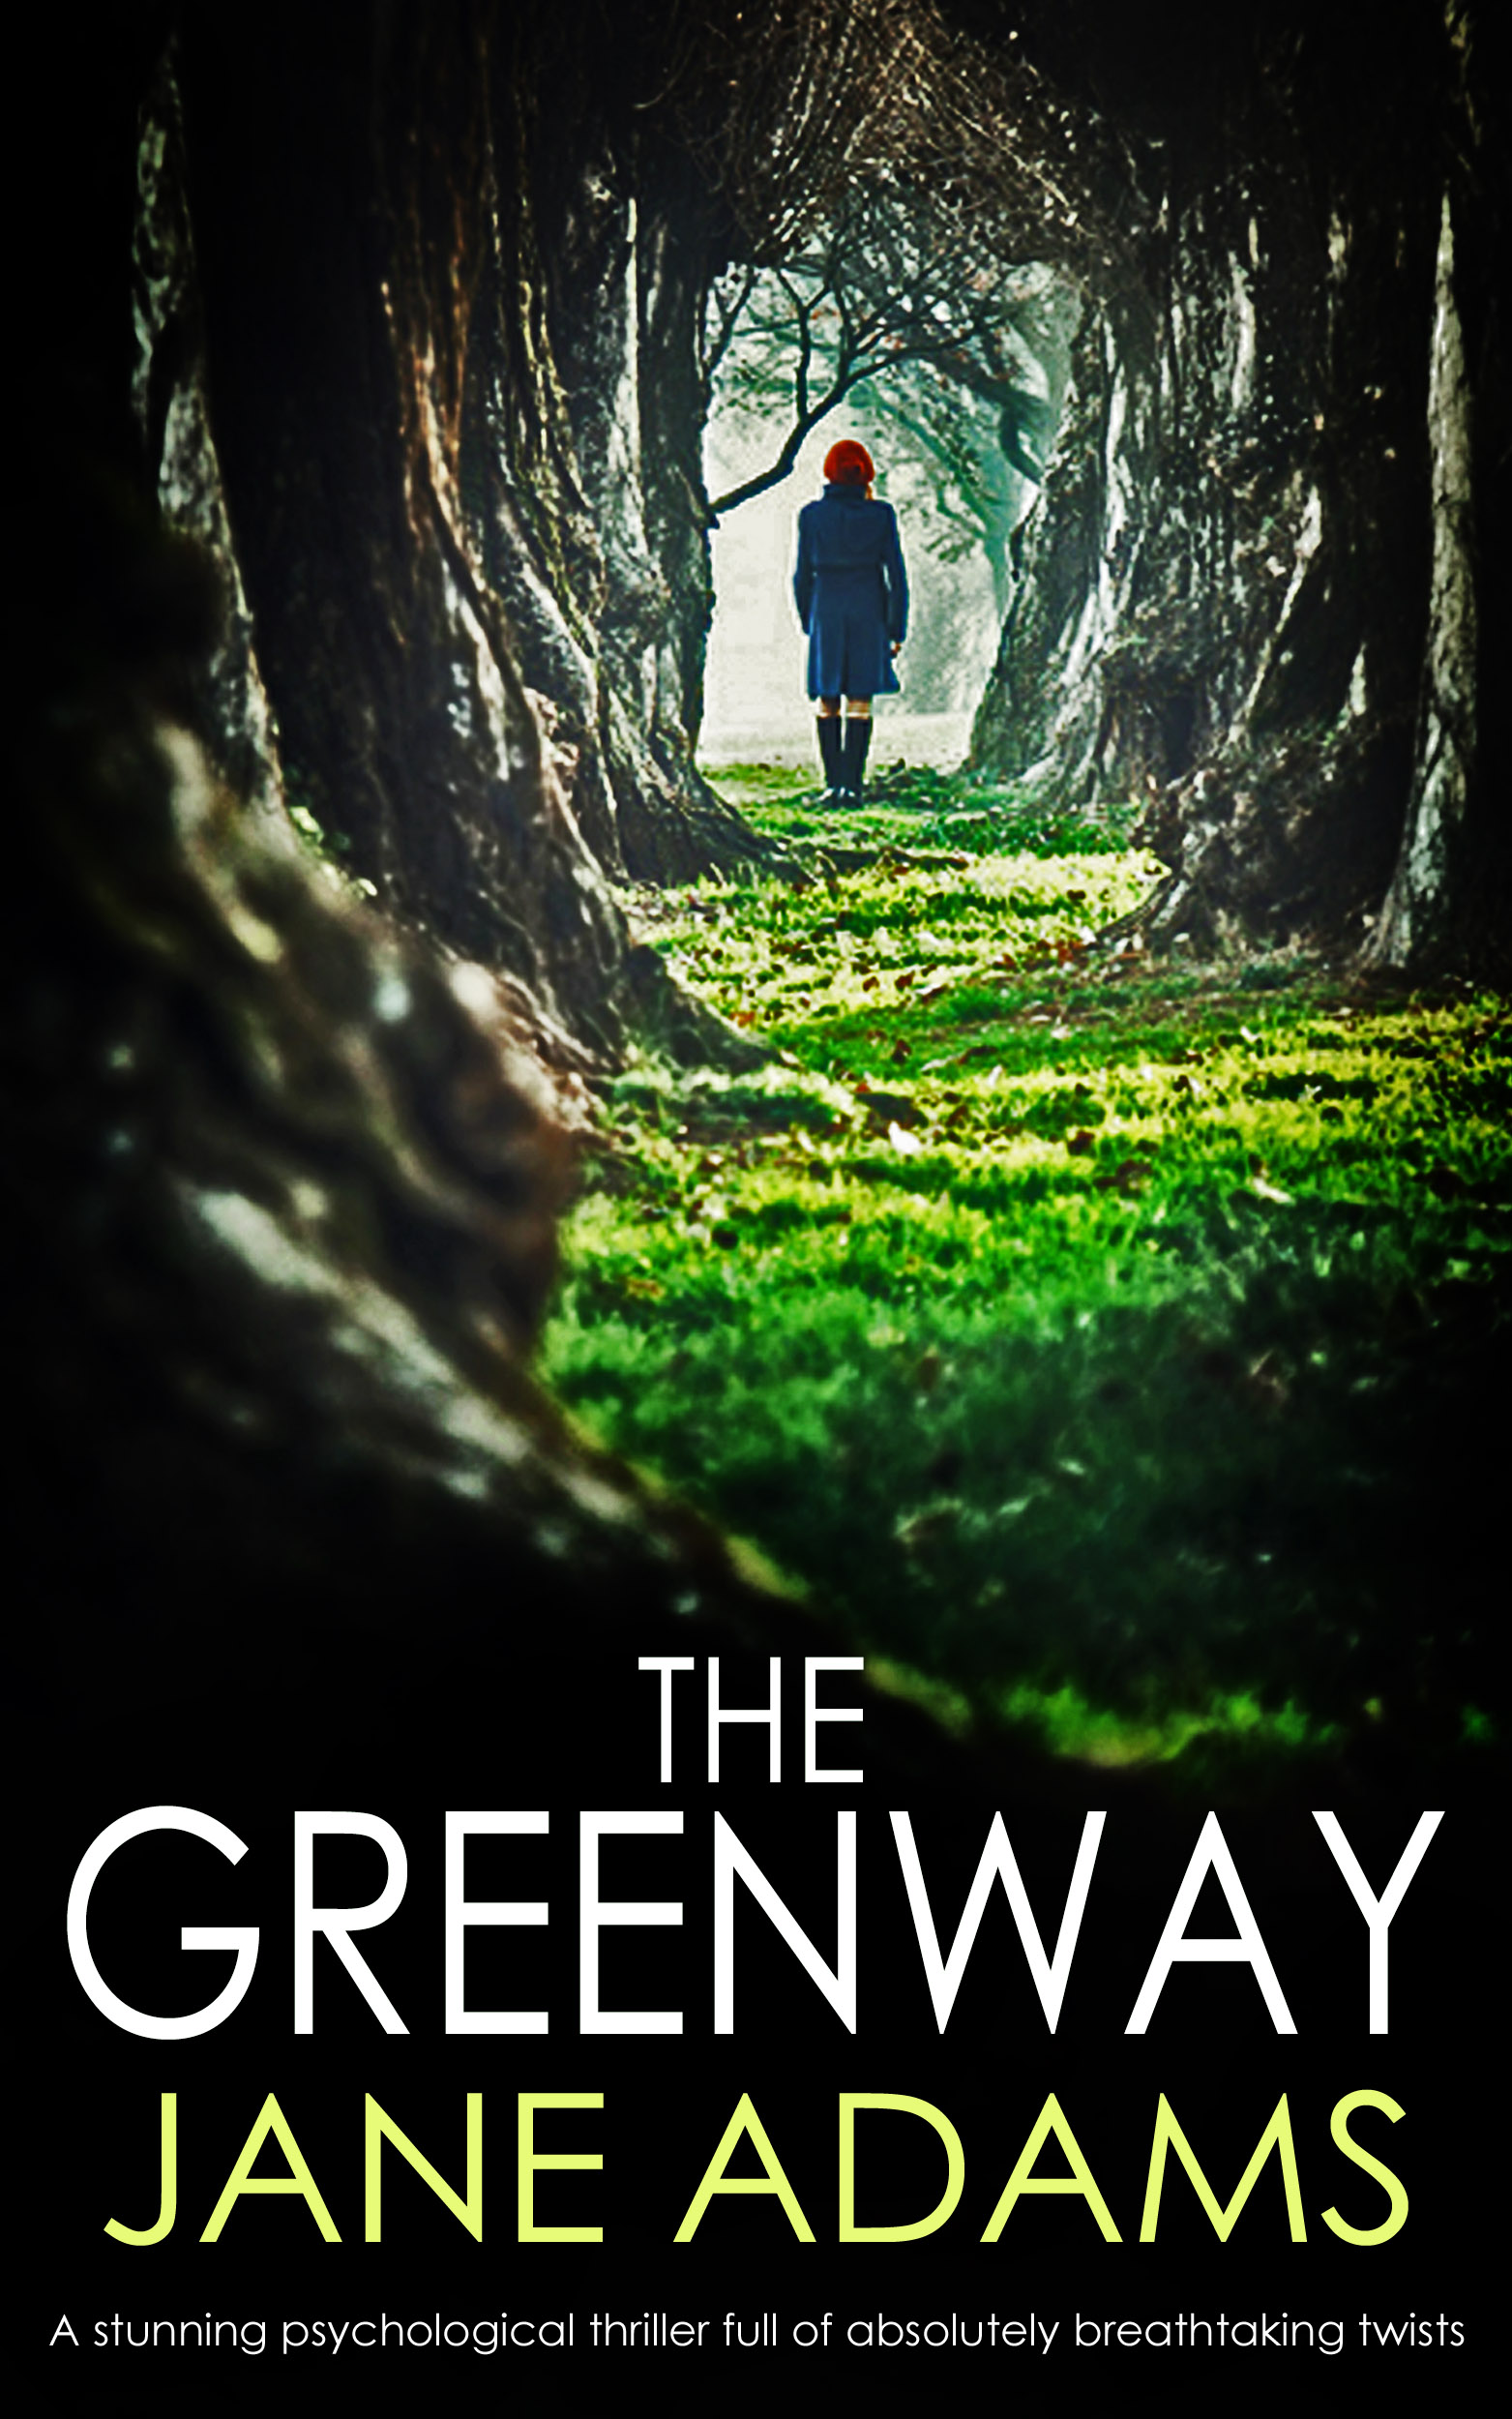 THE GREENWAY FINAL COVER.jpg